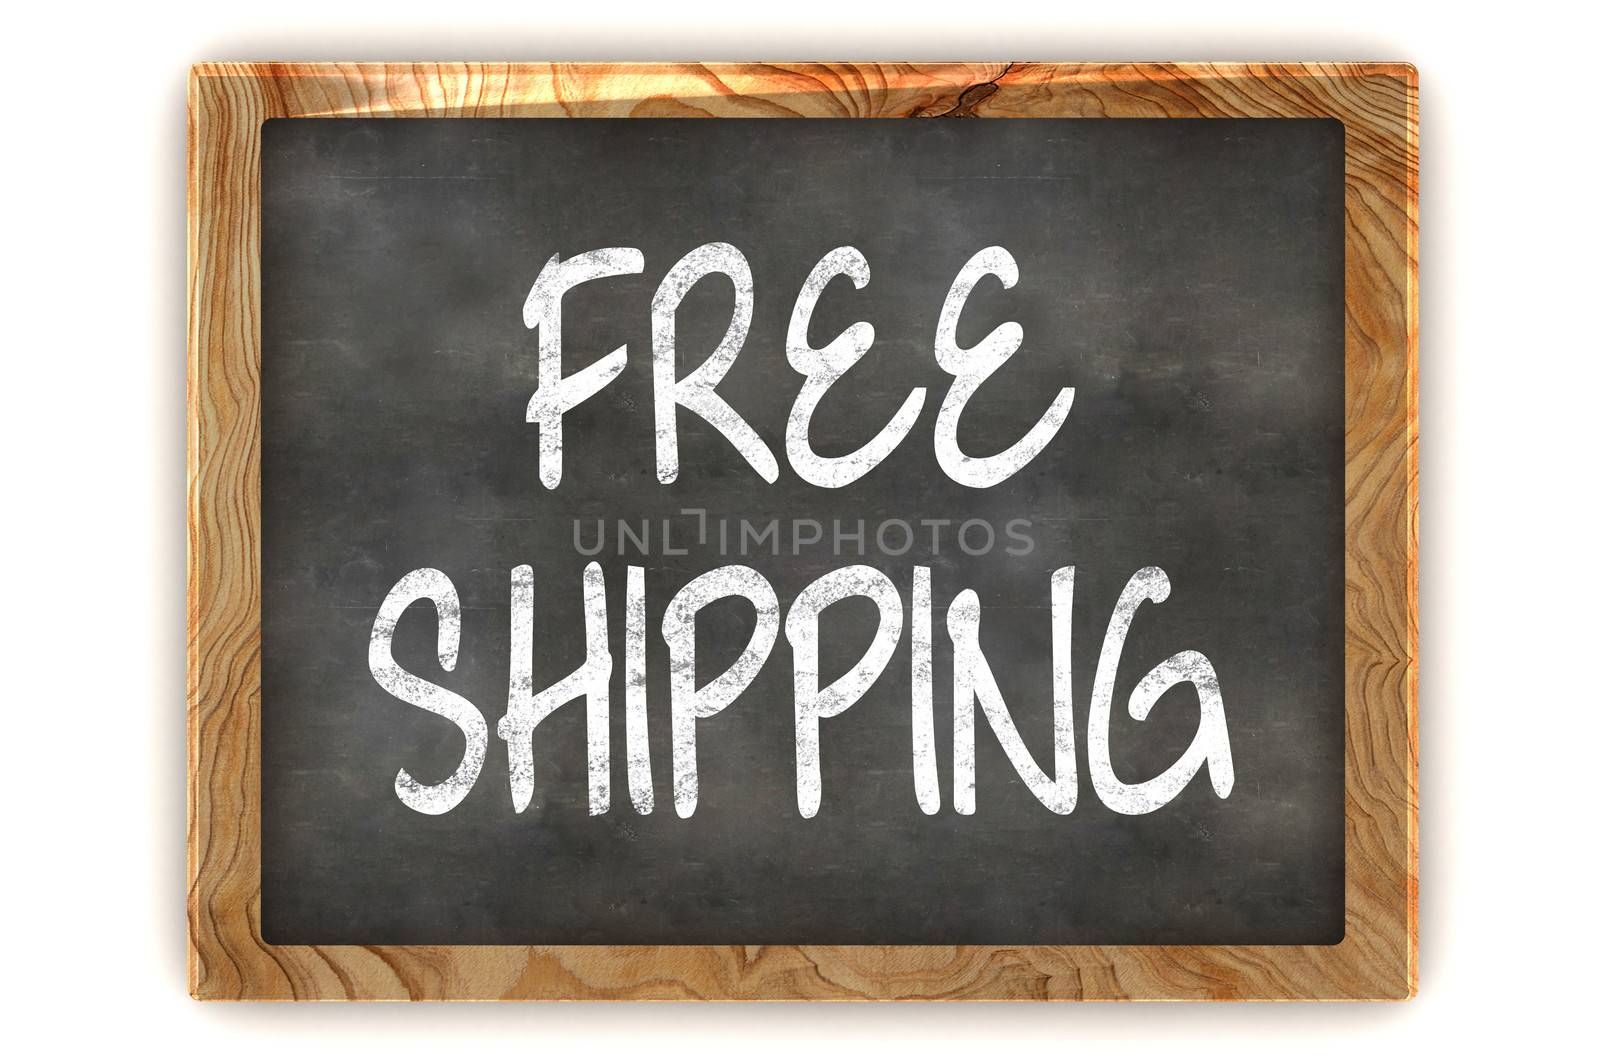 A Colourful 3d Rendered Illustration of a Blackboard Showing Free Shipping